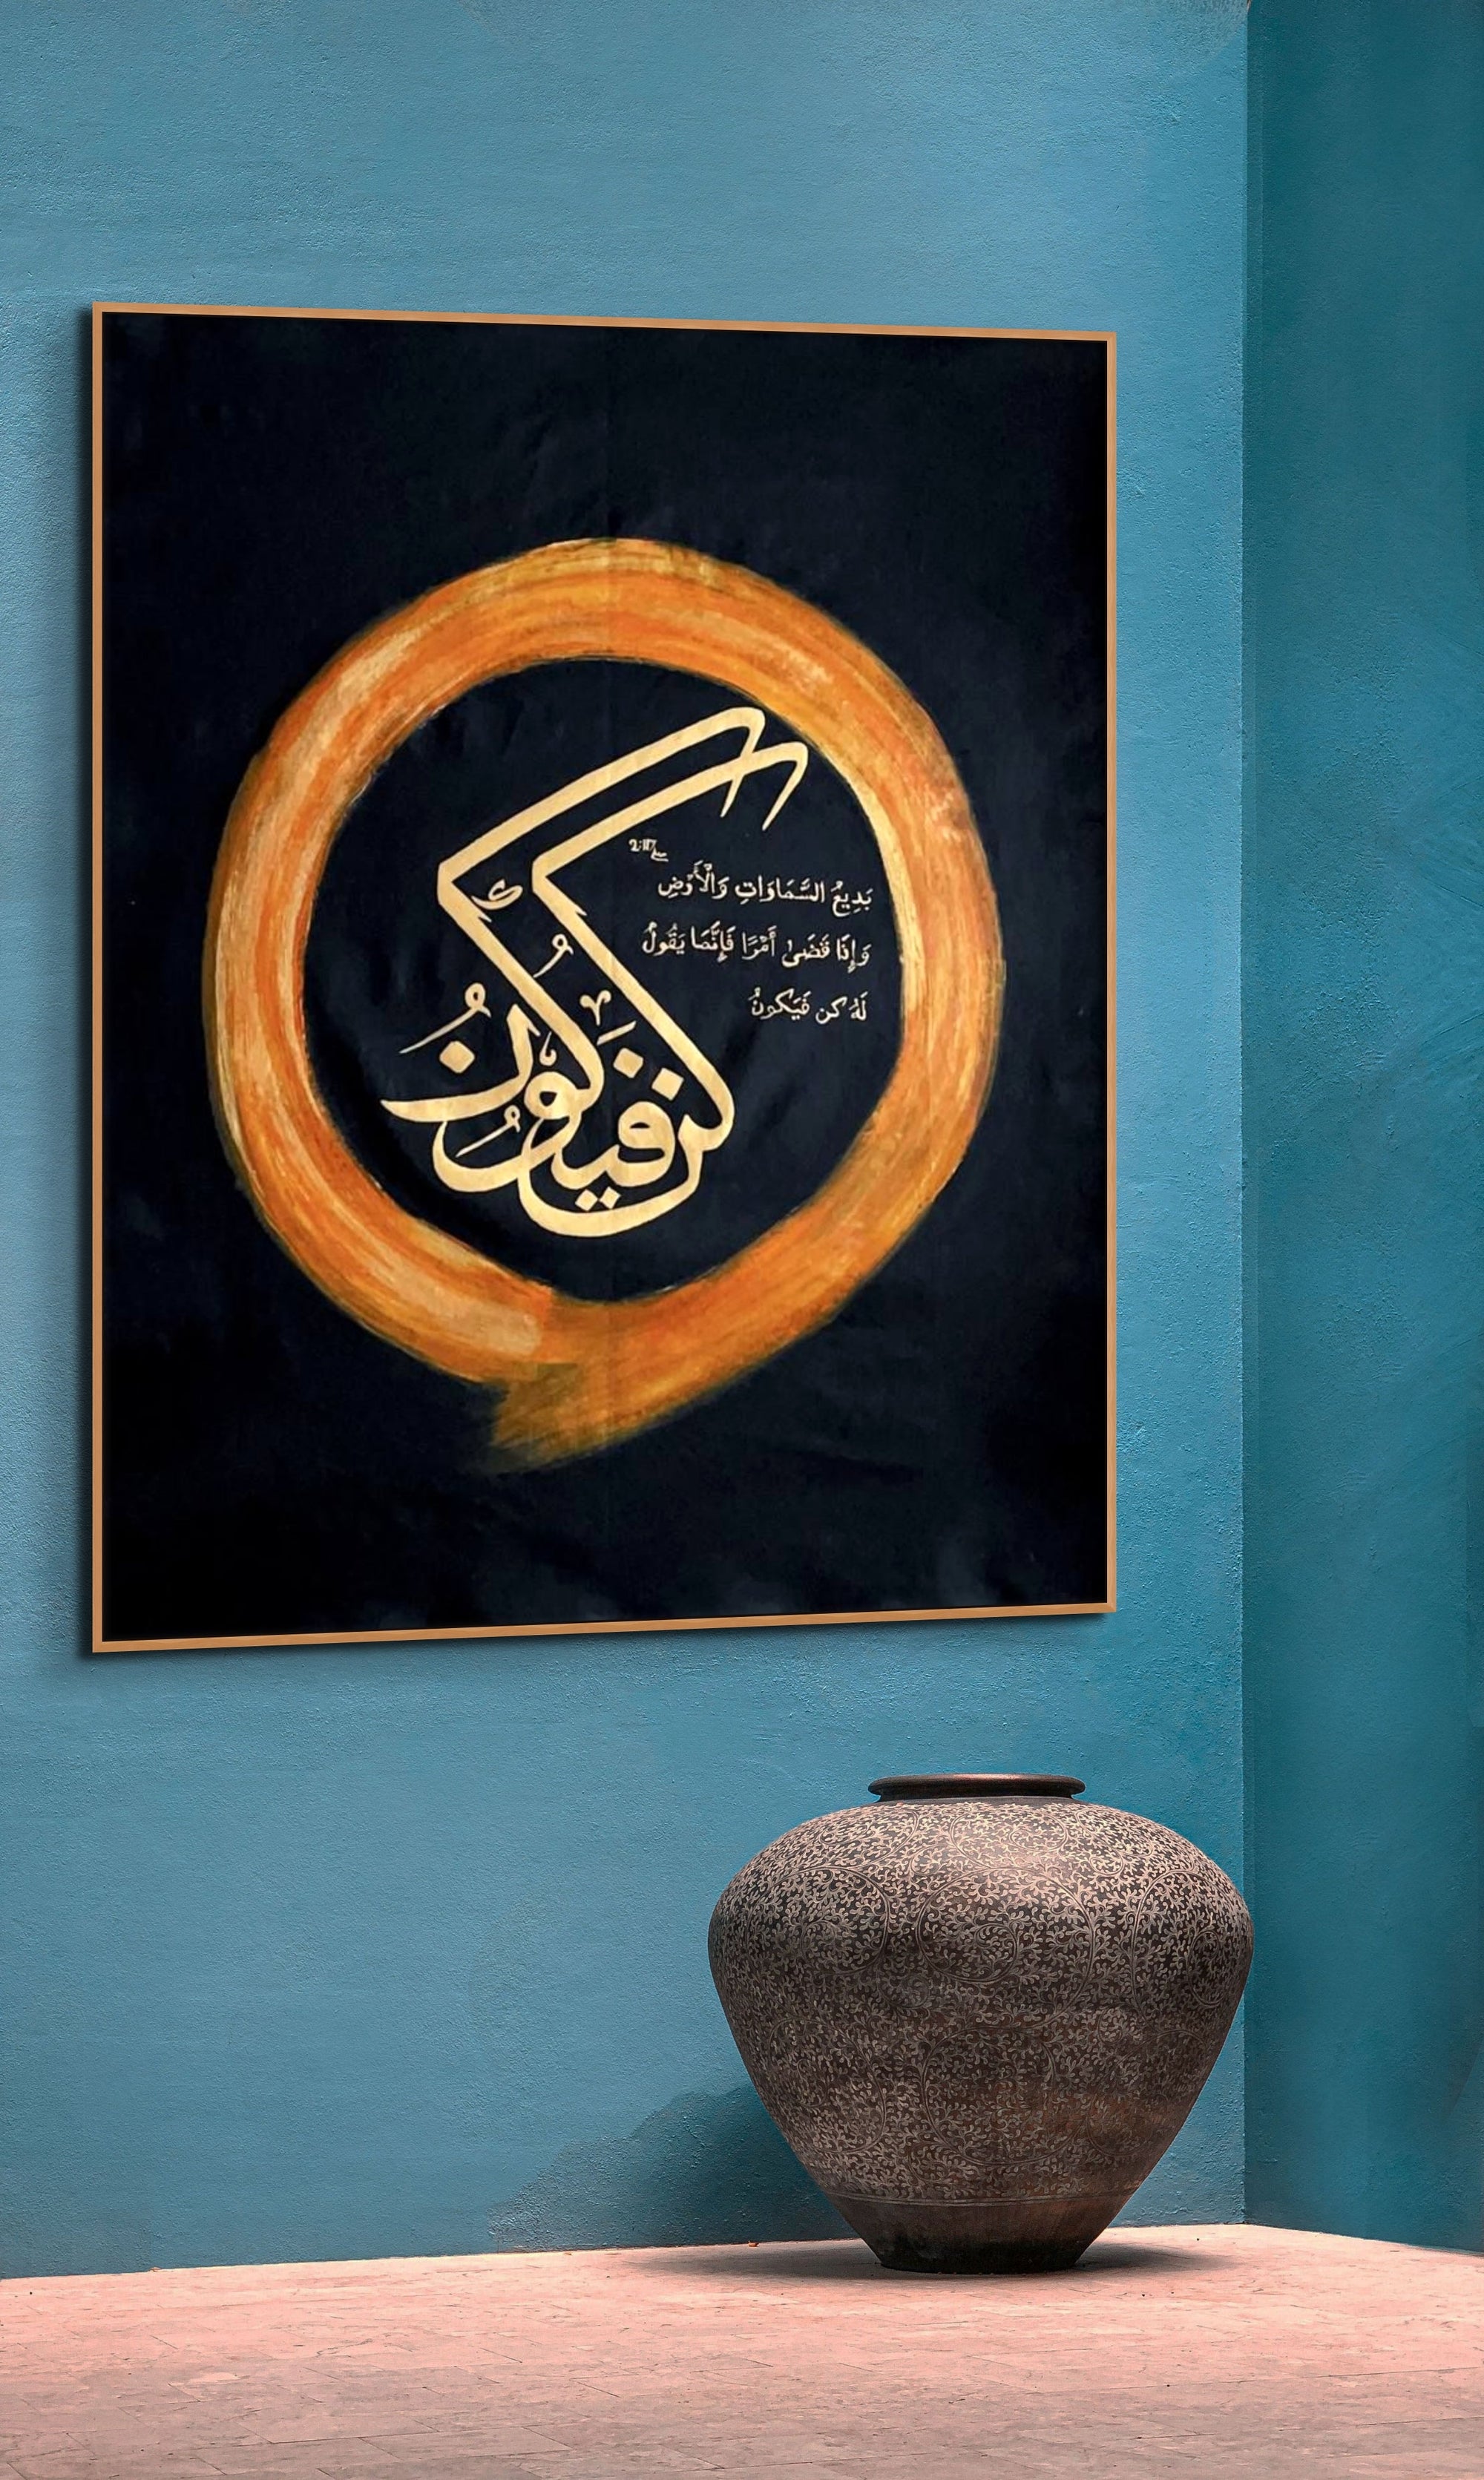 "Be And It Is"Framed Calligraphy - Islamic Art Ltd